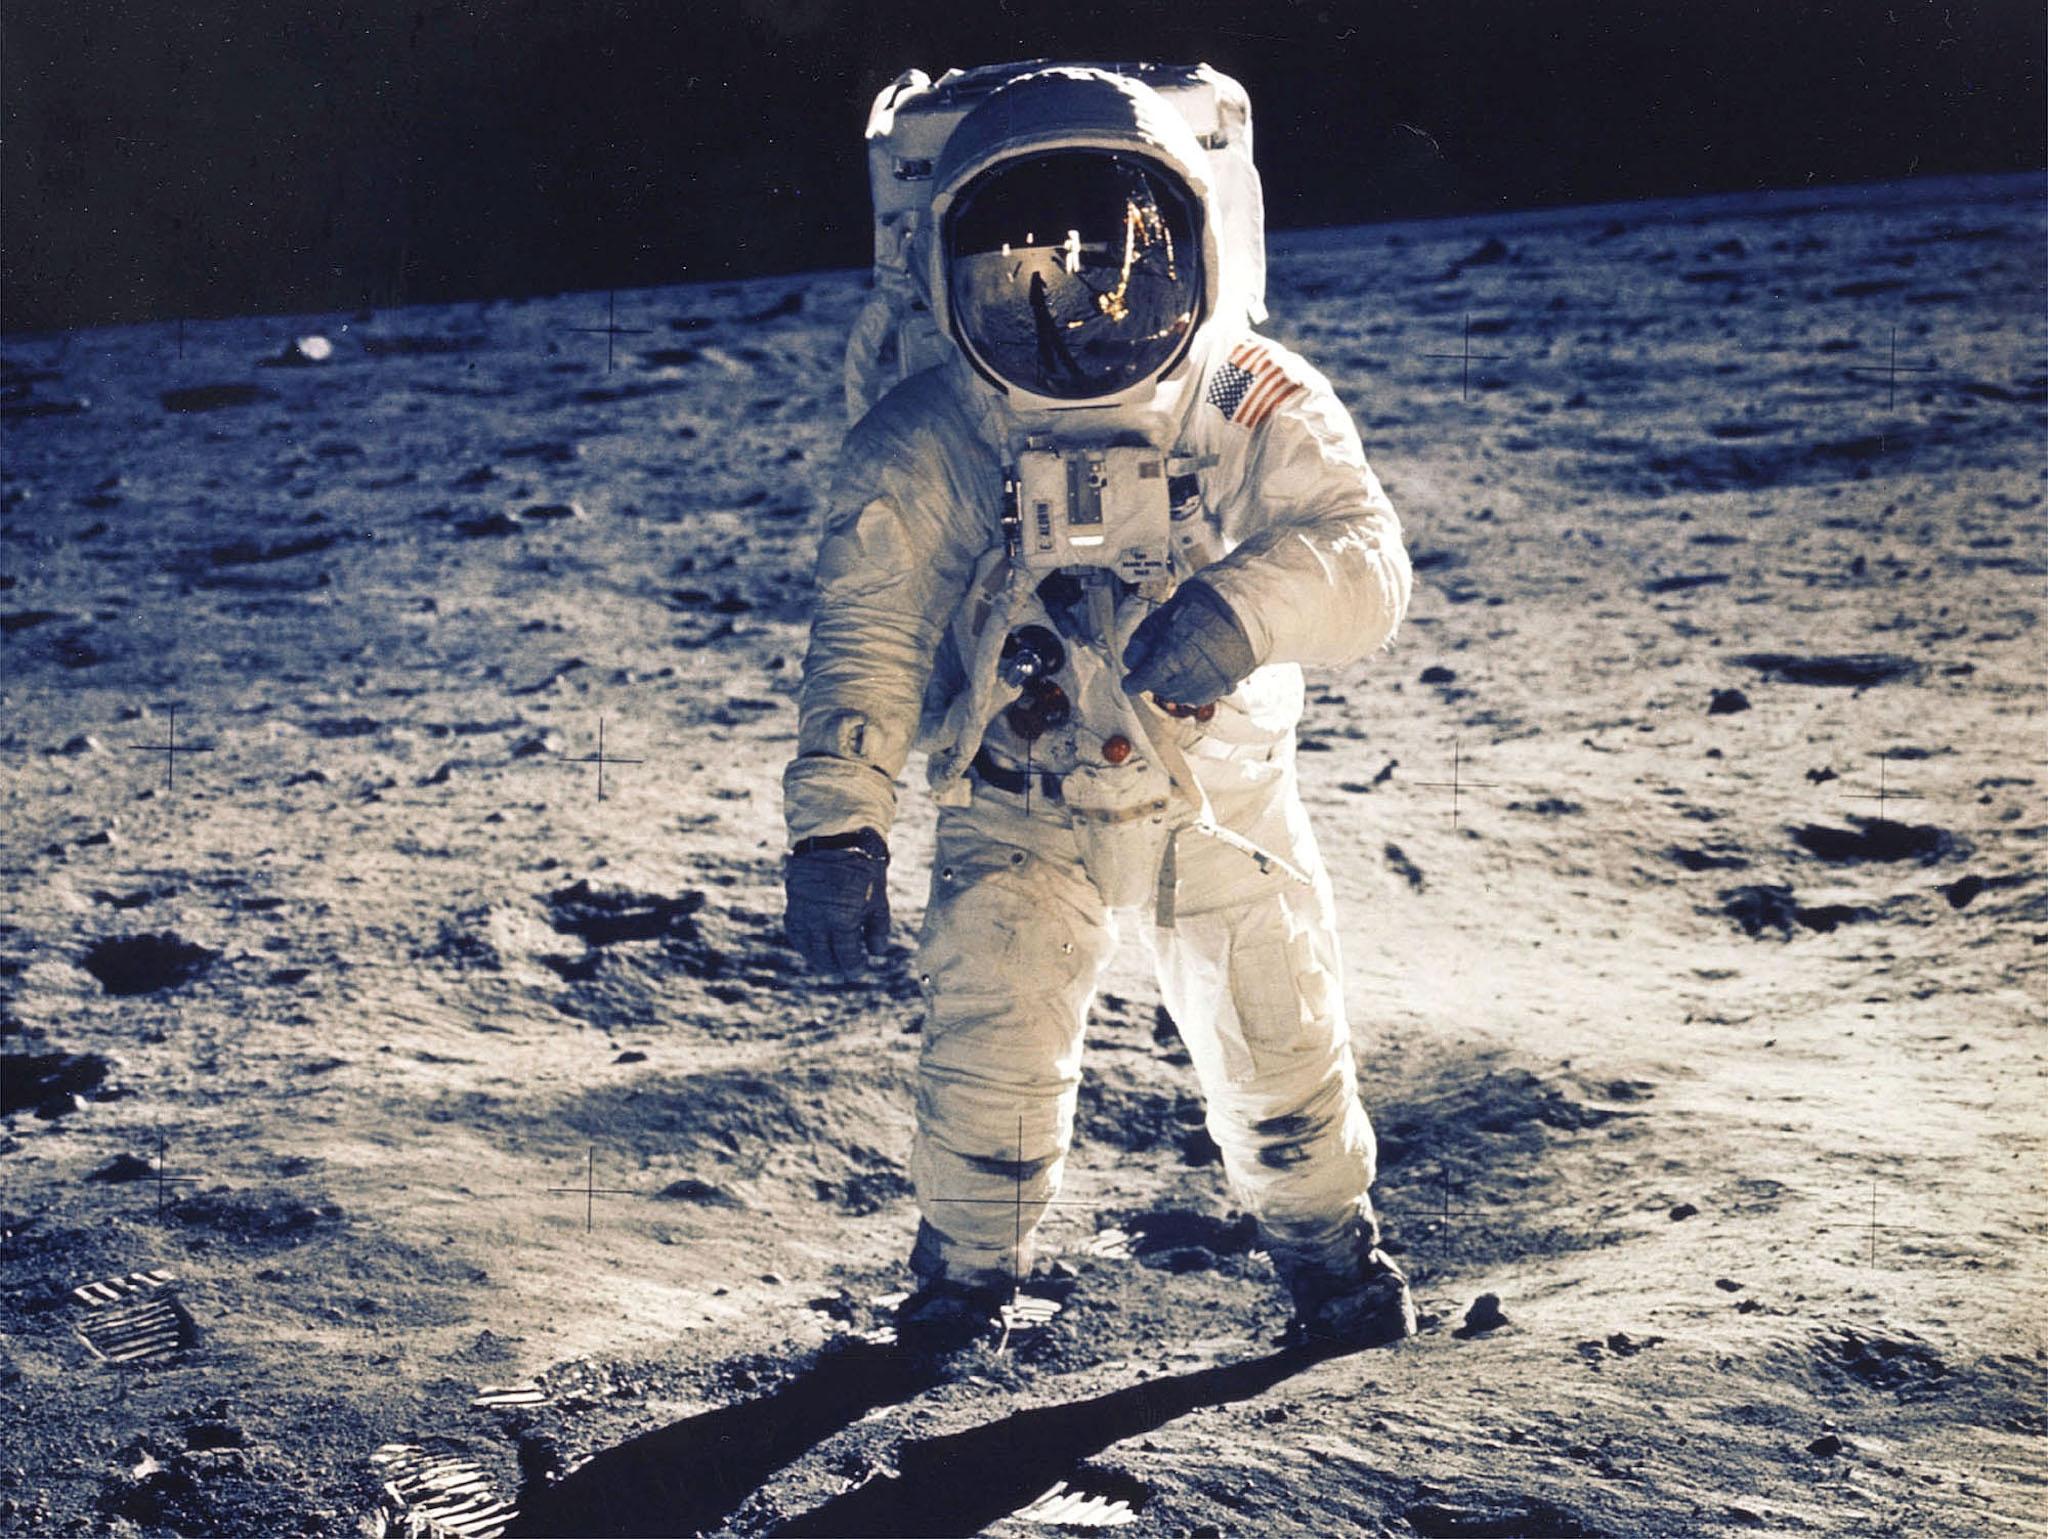 The scientists have been studying rocks brought back by Apollo 14 astronauts in 1971